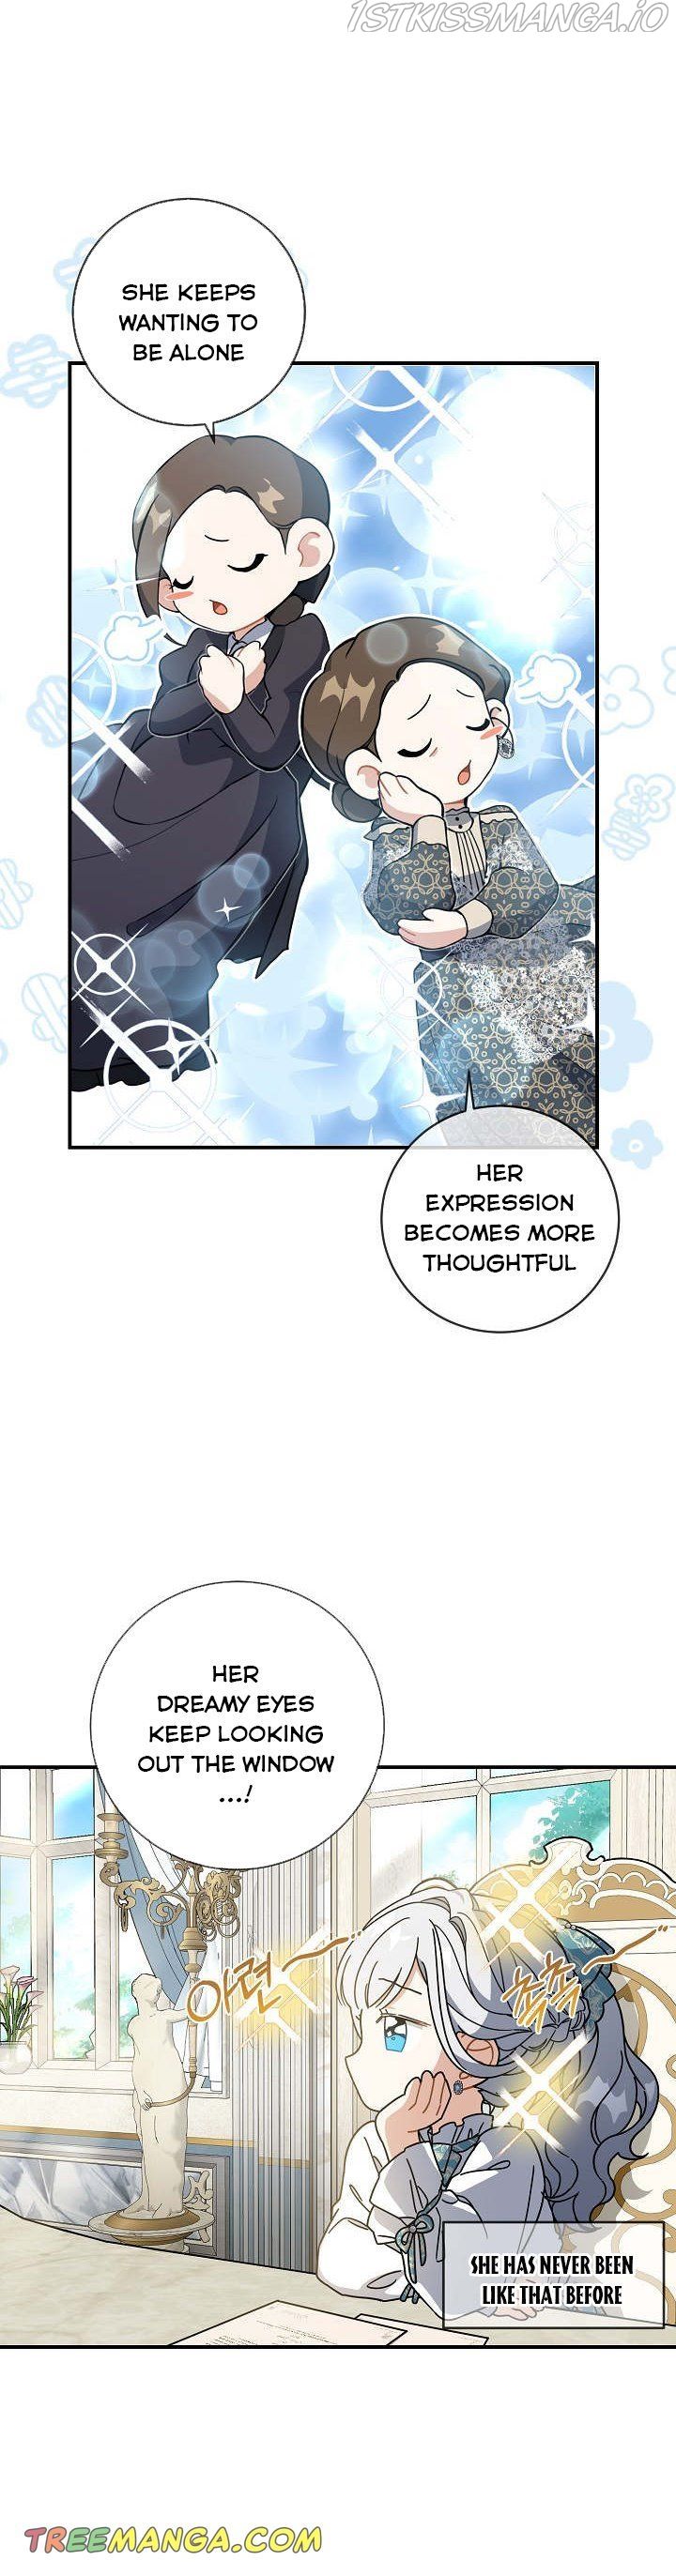 Into the light once again Chapter 51 page 21 - MangaWeebs.in